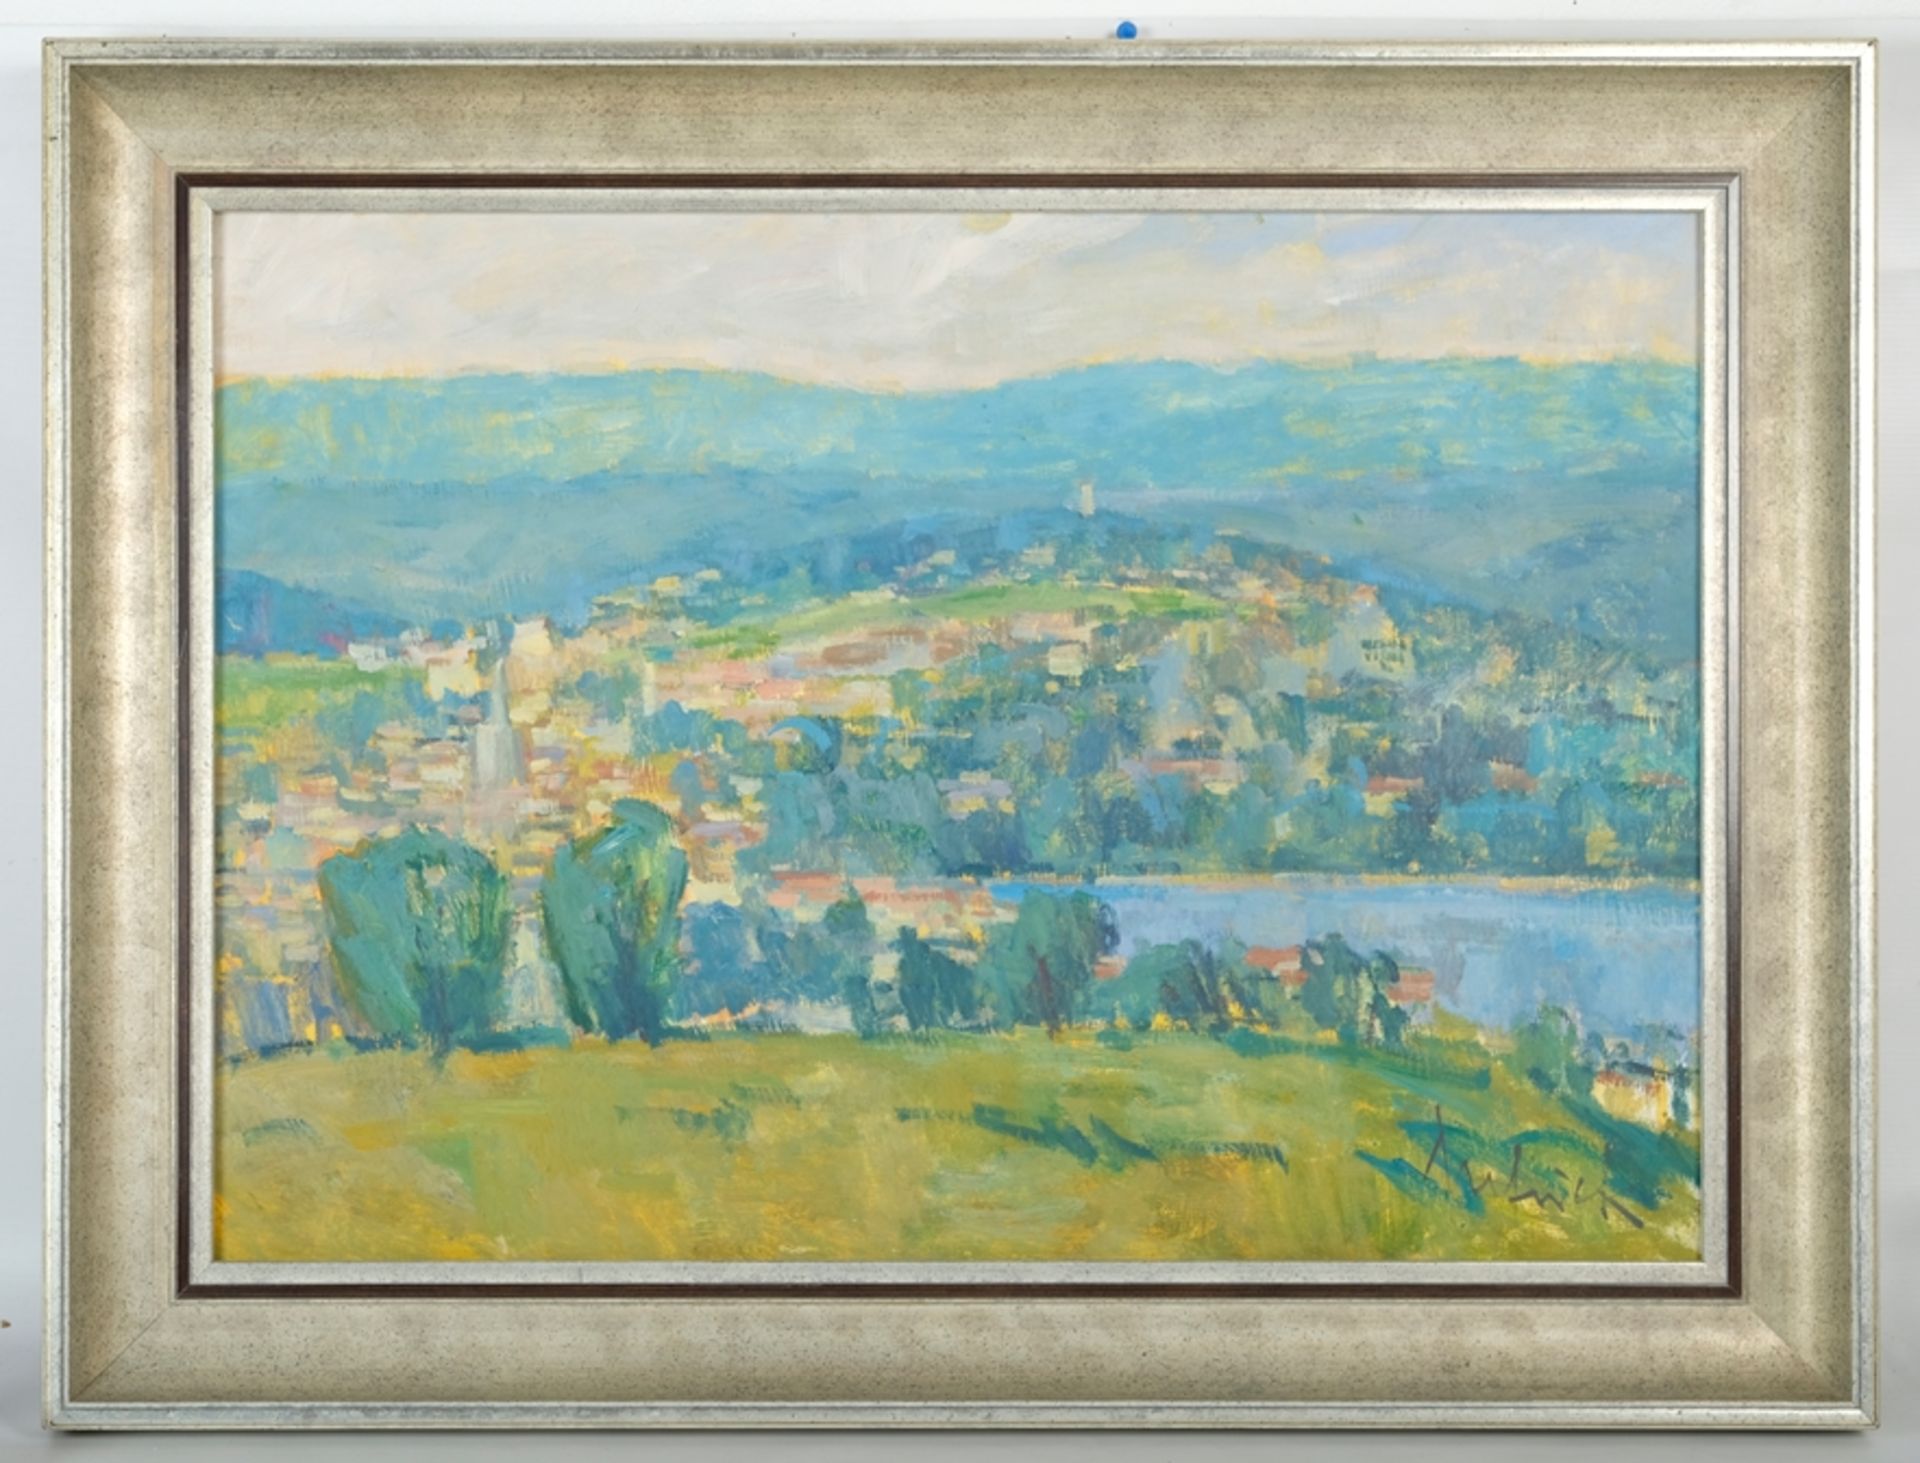 Frick, Guido (born 1947) "Blick über Konstanz", View over Constance and the lake, in the background - Image 2 of 4